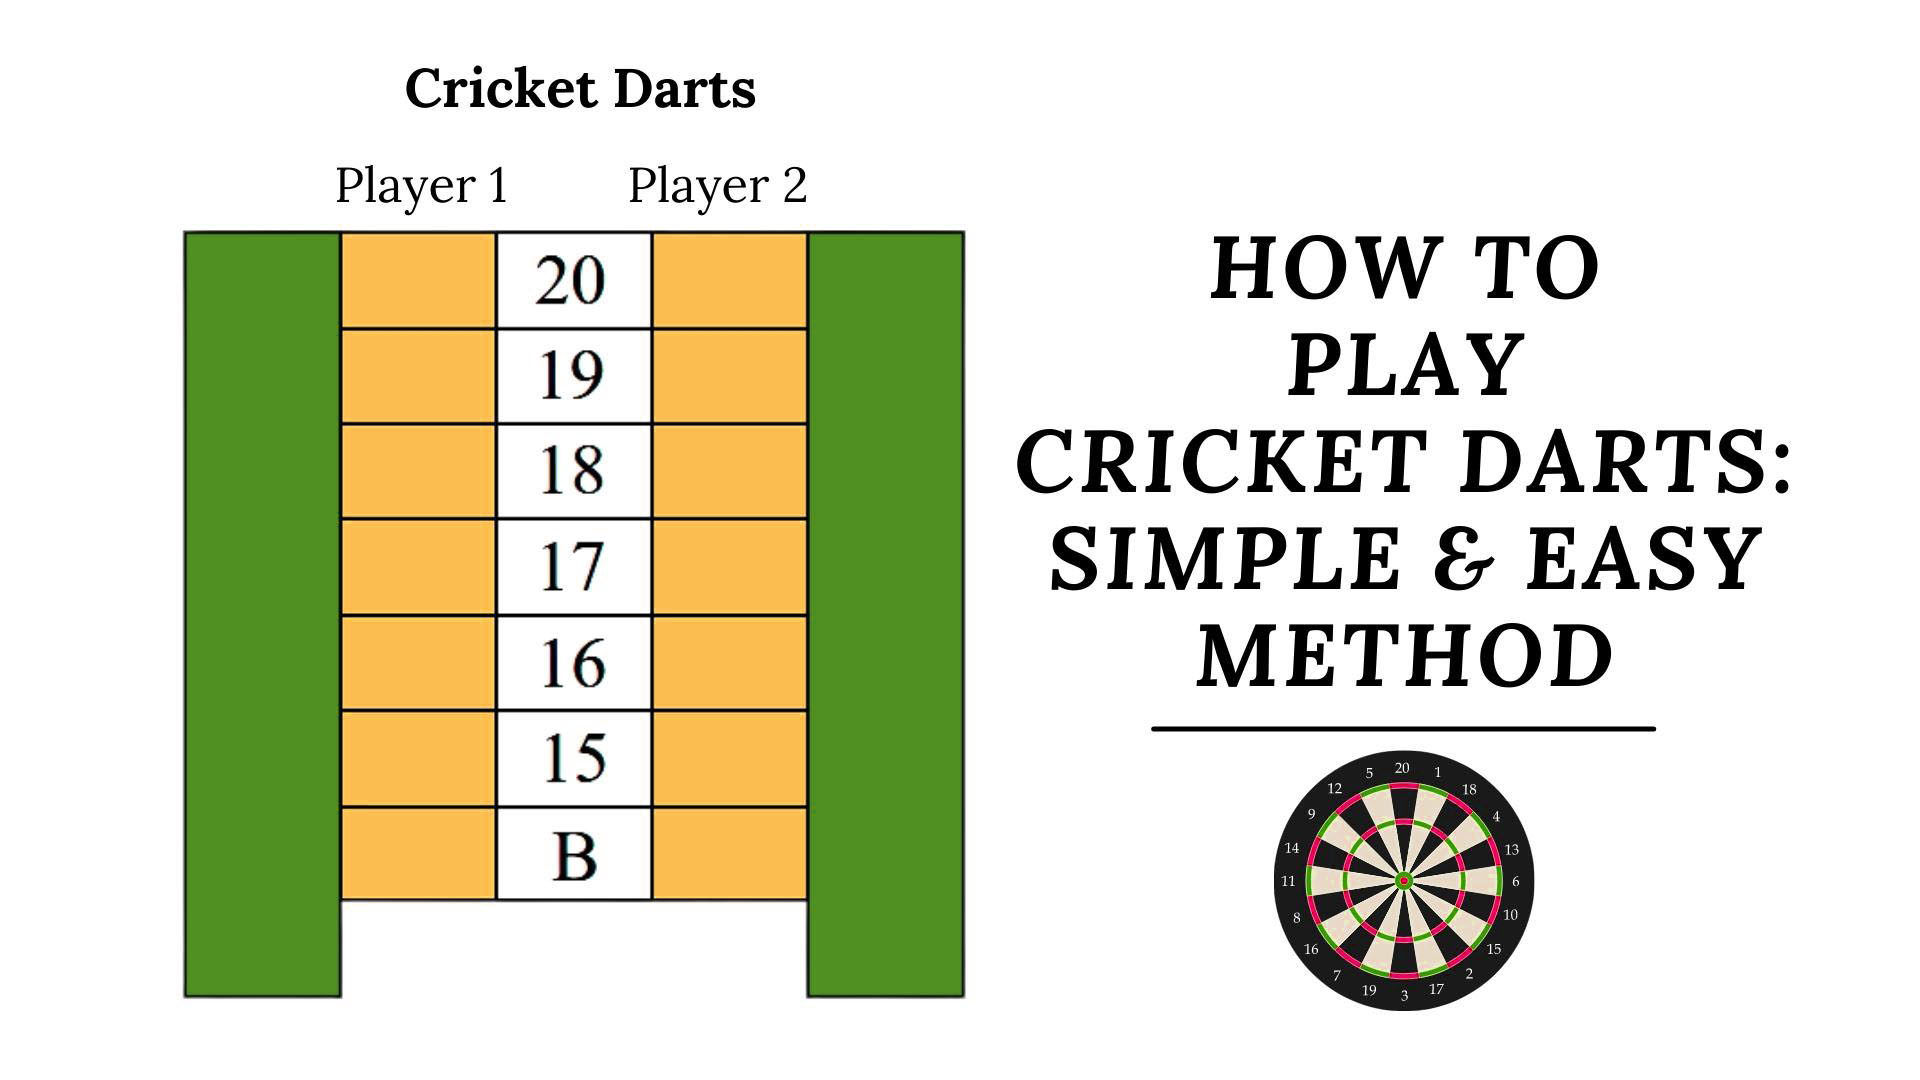 How To Play Cricket Darts: Simple & Easy Method